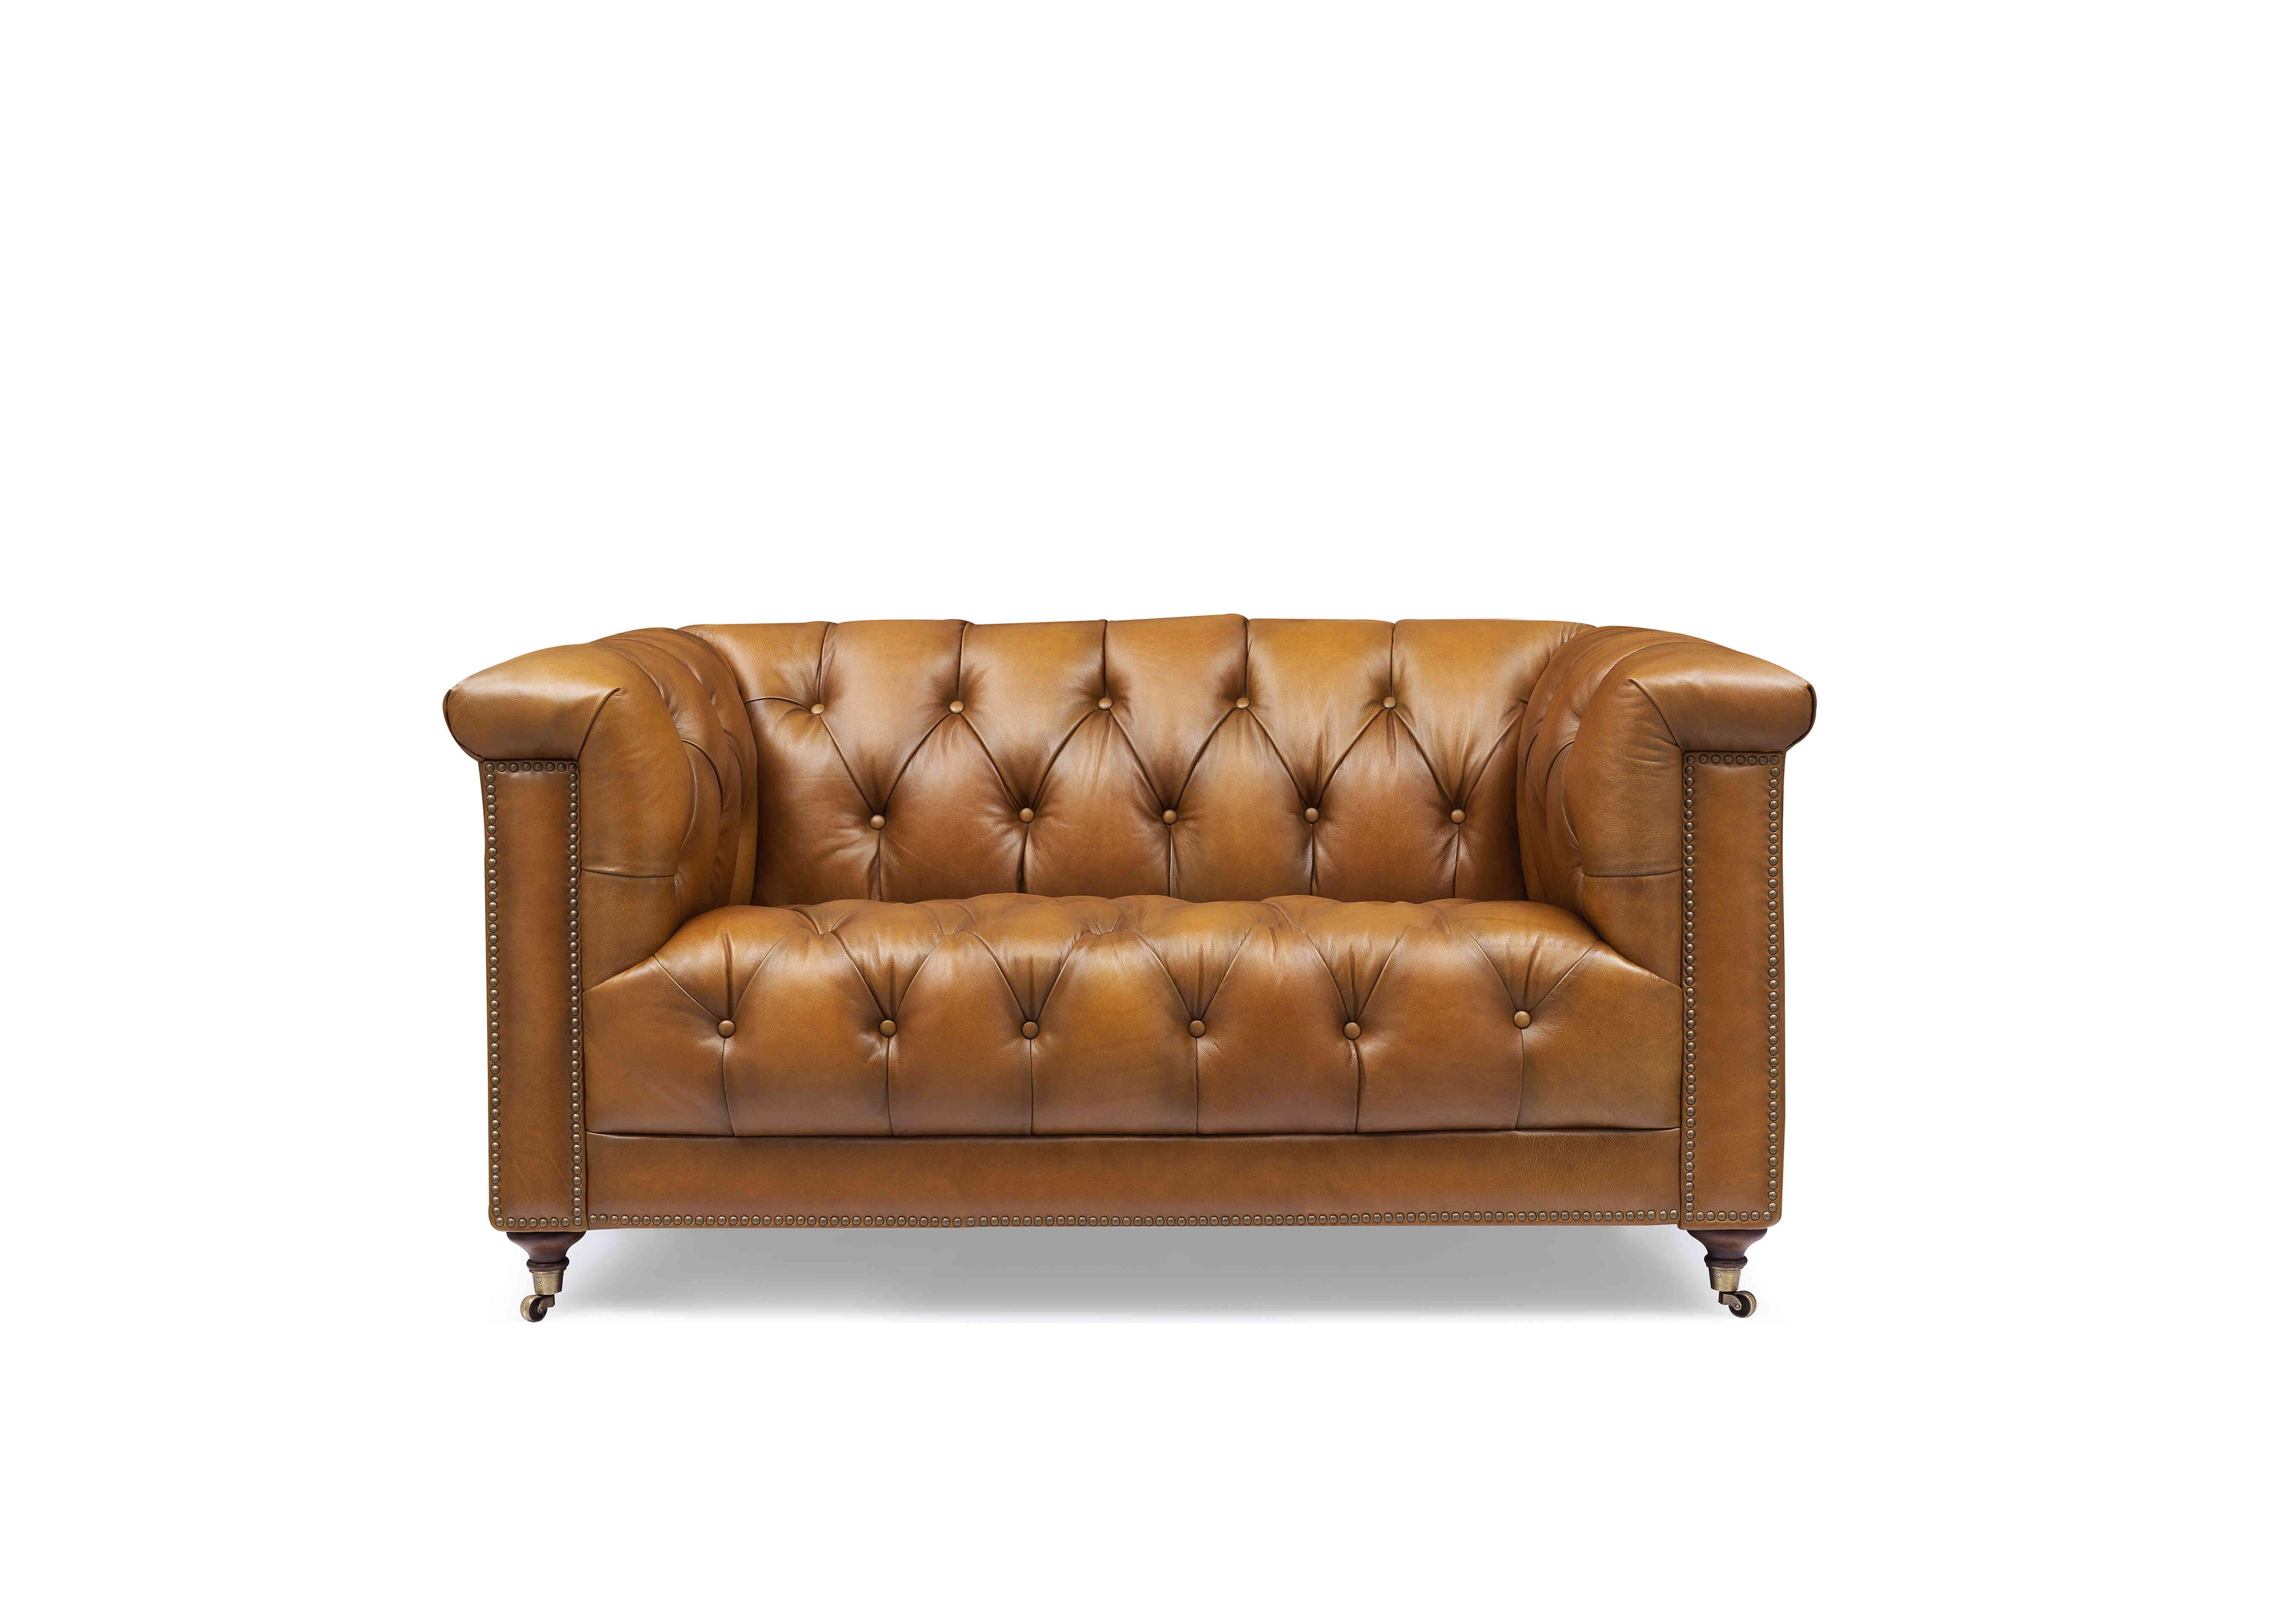 Wallace 2 Seater Leather Chesterfield Sofa with USB-C in X3y1-1957ls Inca on Furniture Village